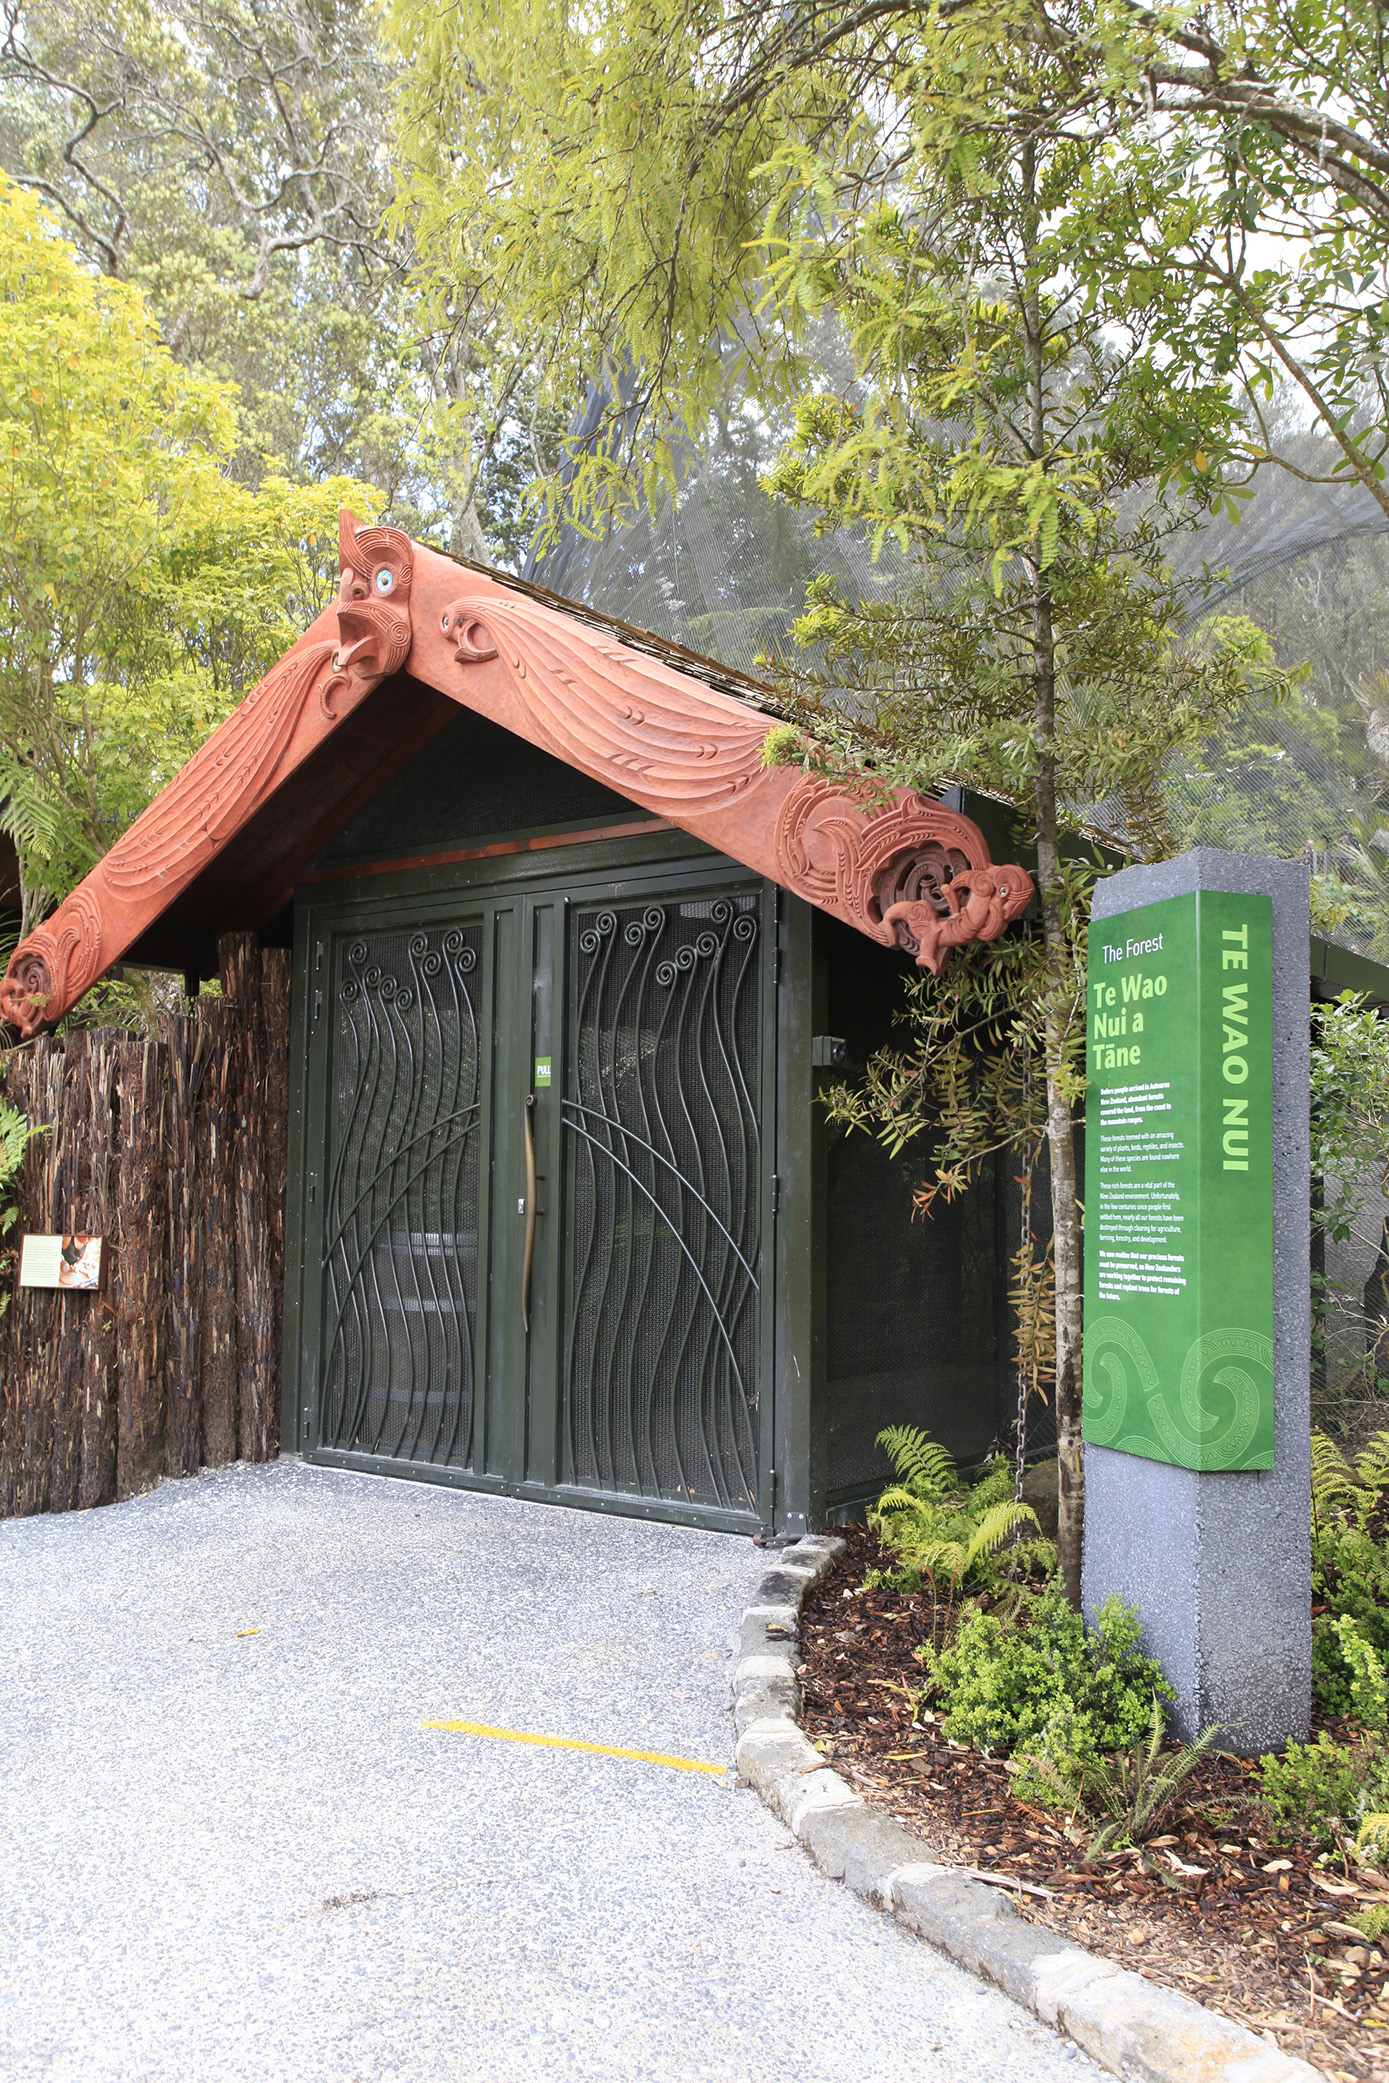 Entry to the forest Te Wao nui a Tane WEB.jpg